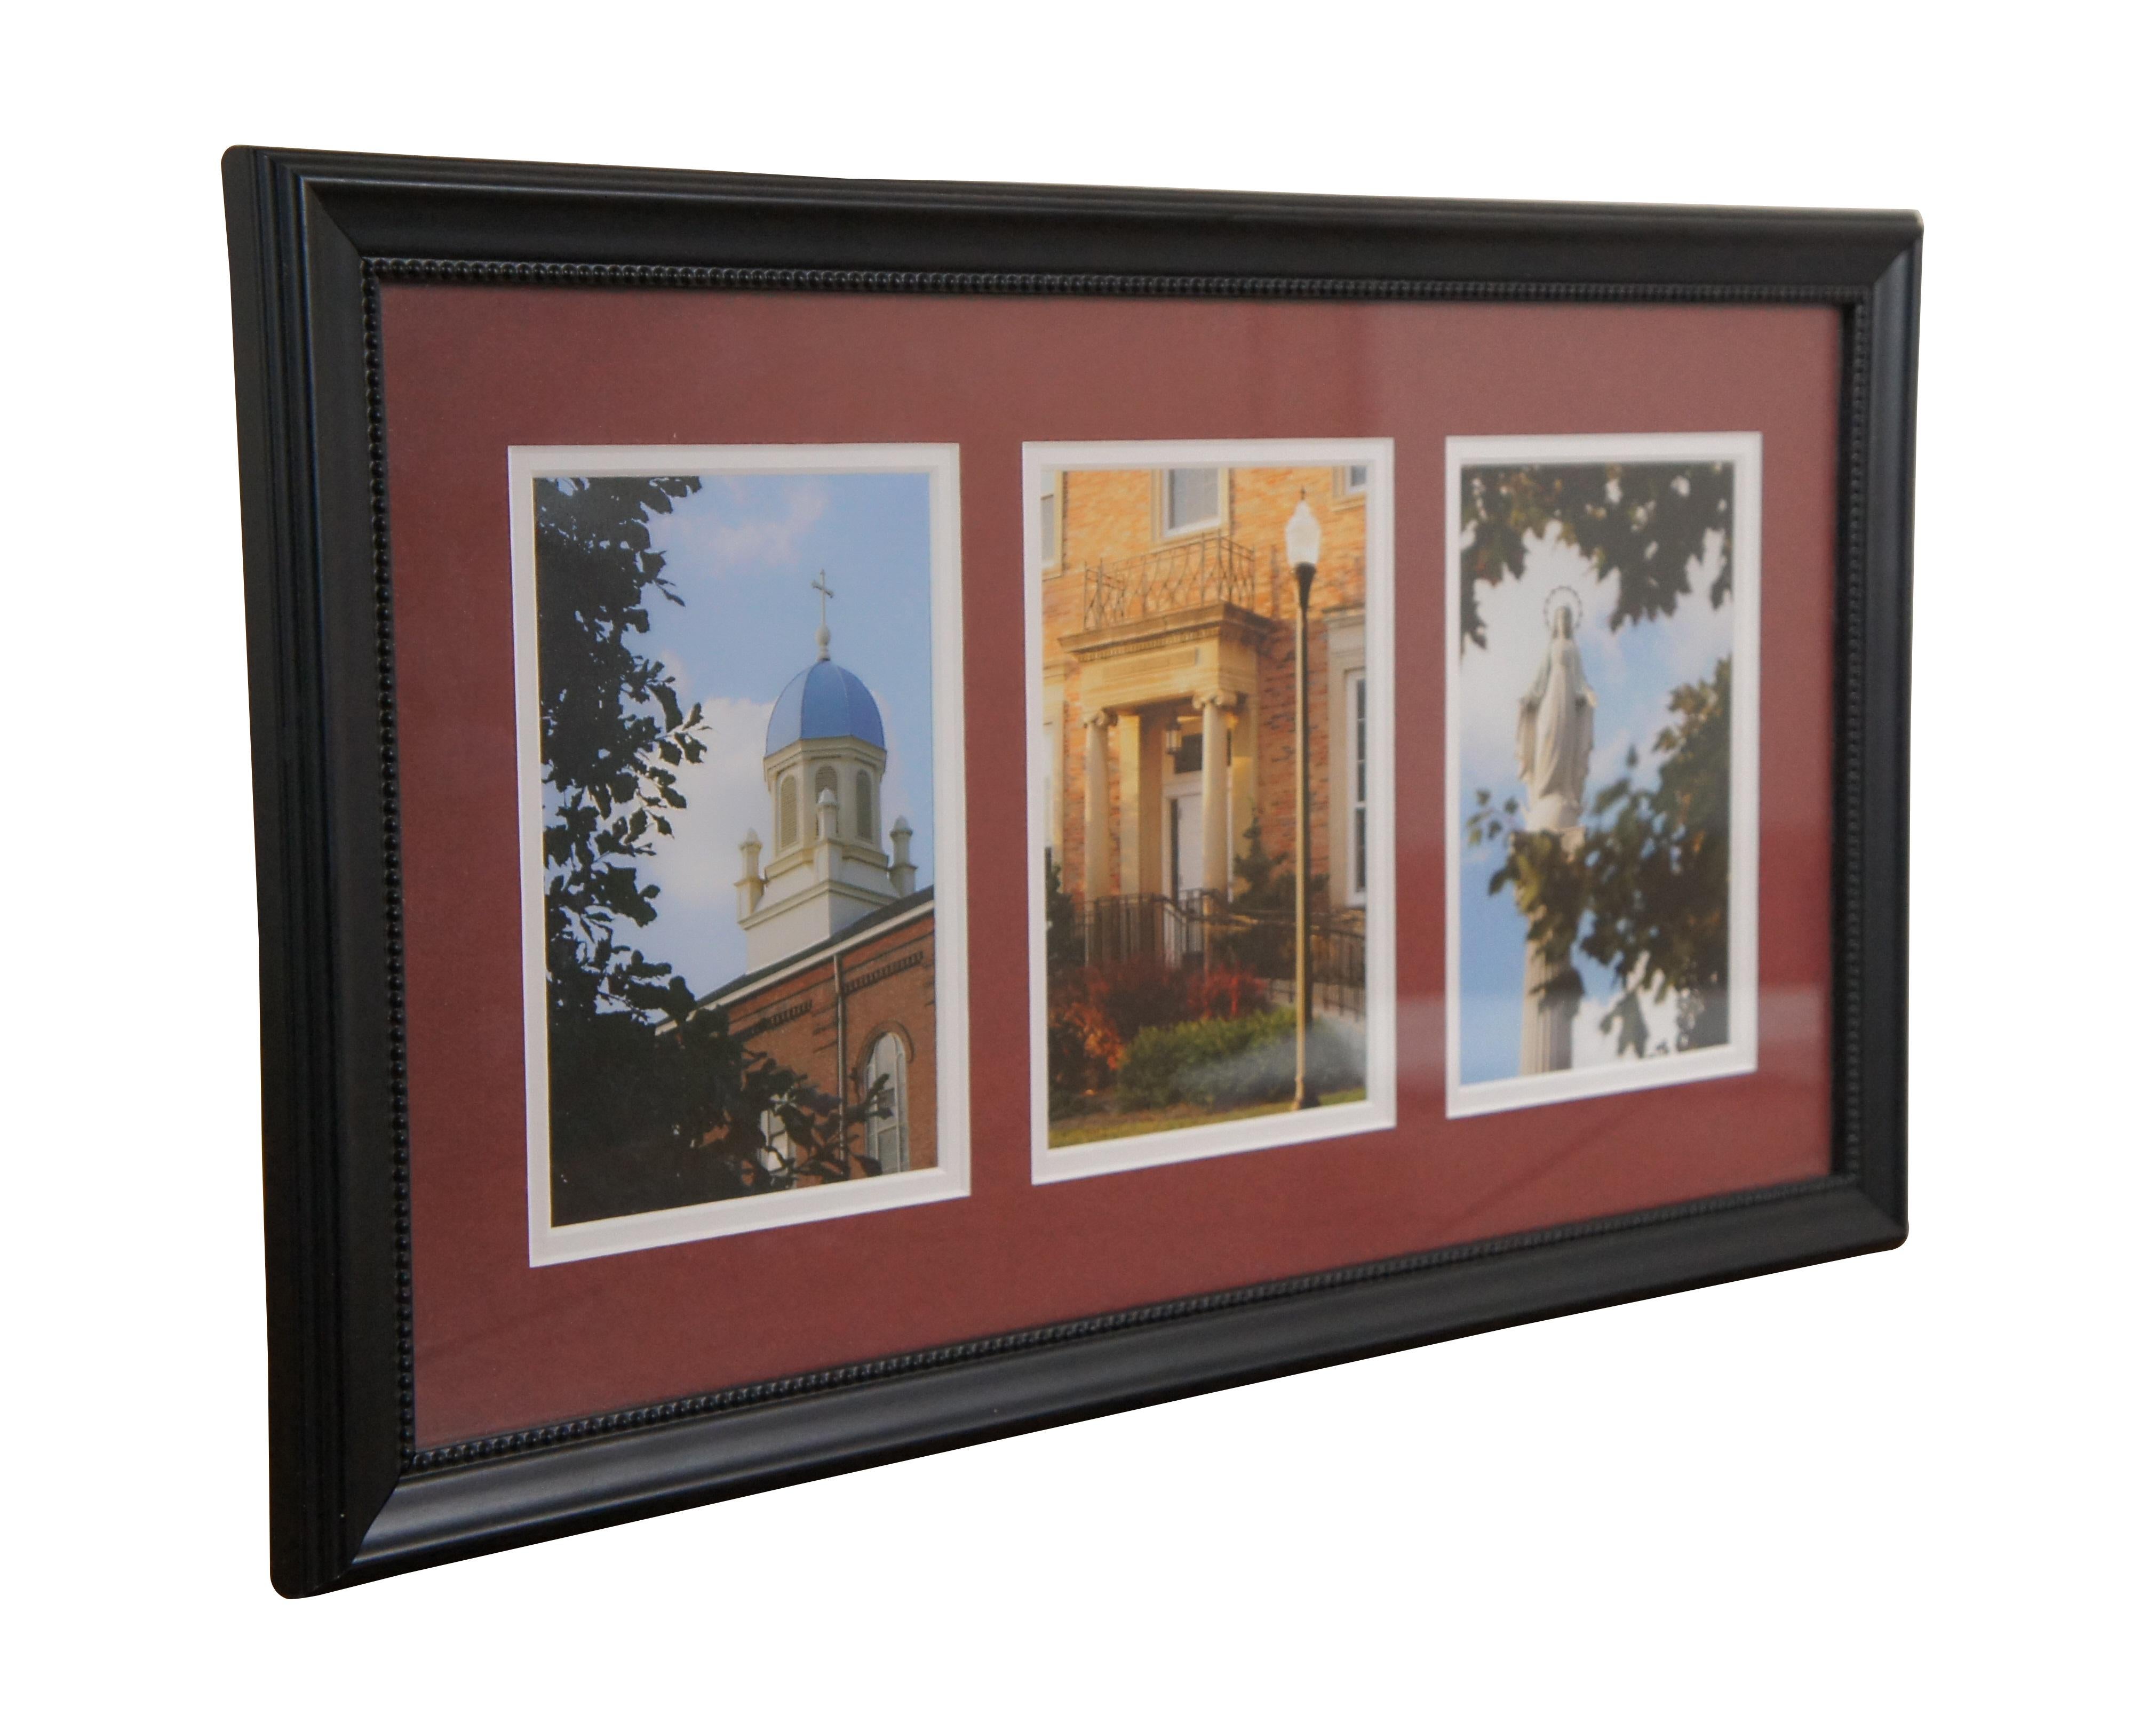 Neatly framed triptych of photographs of sites at the University of Dayton, Ohio campus including the dome of the Chapel of the Immaculate Conception, the porch of Albert Emmanuel Hall, and the statue of the Virgin Mary that stands between St.